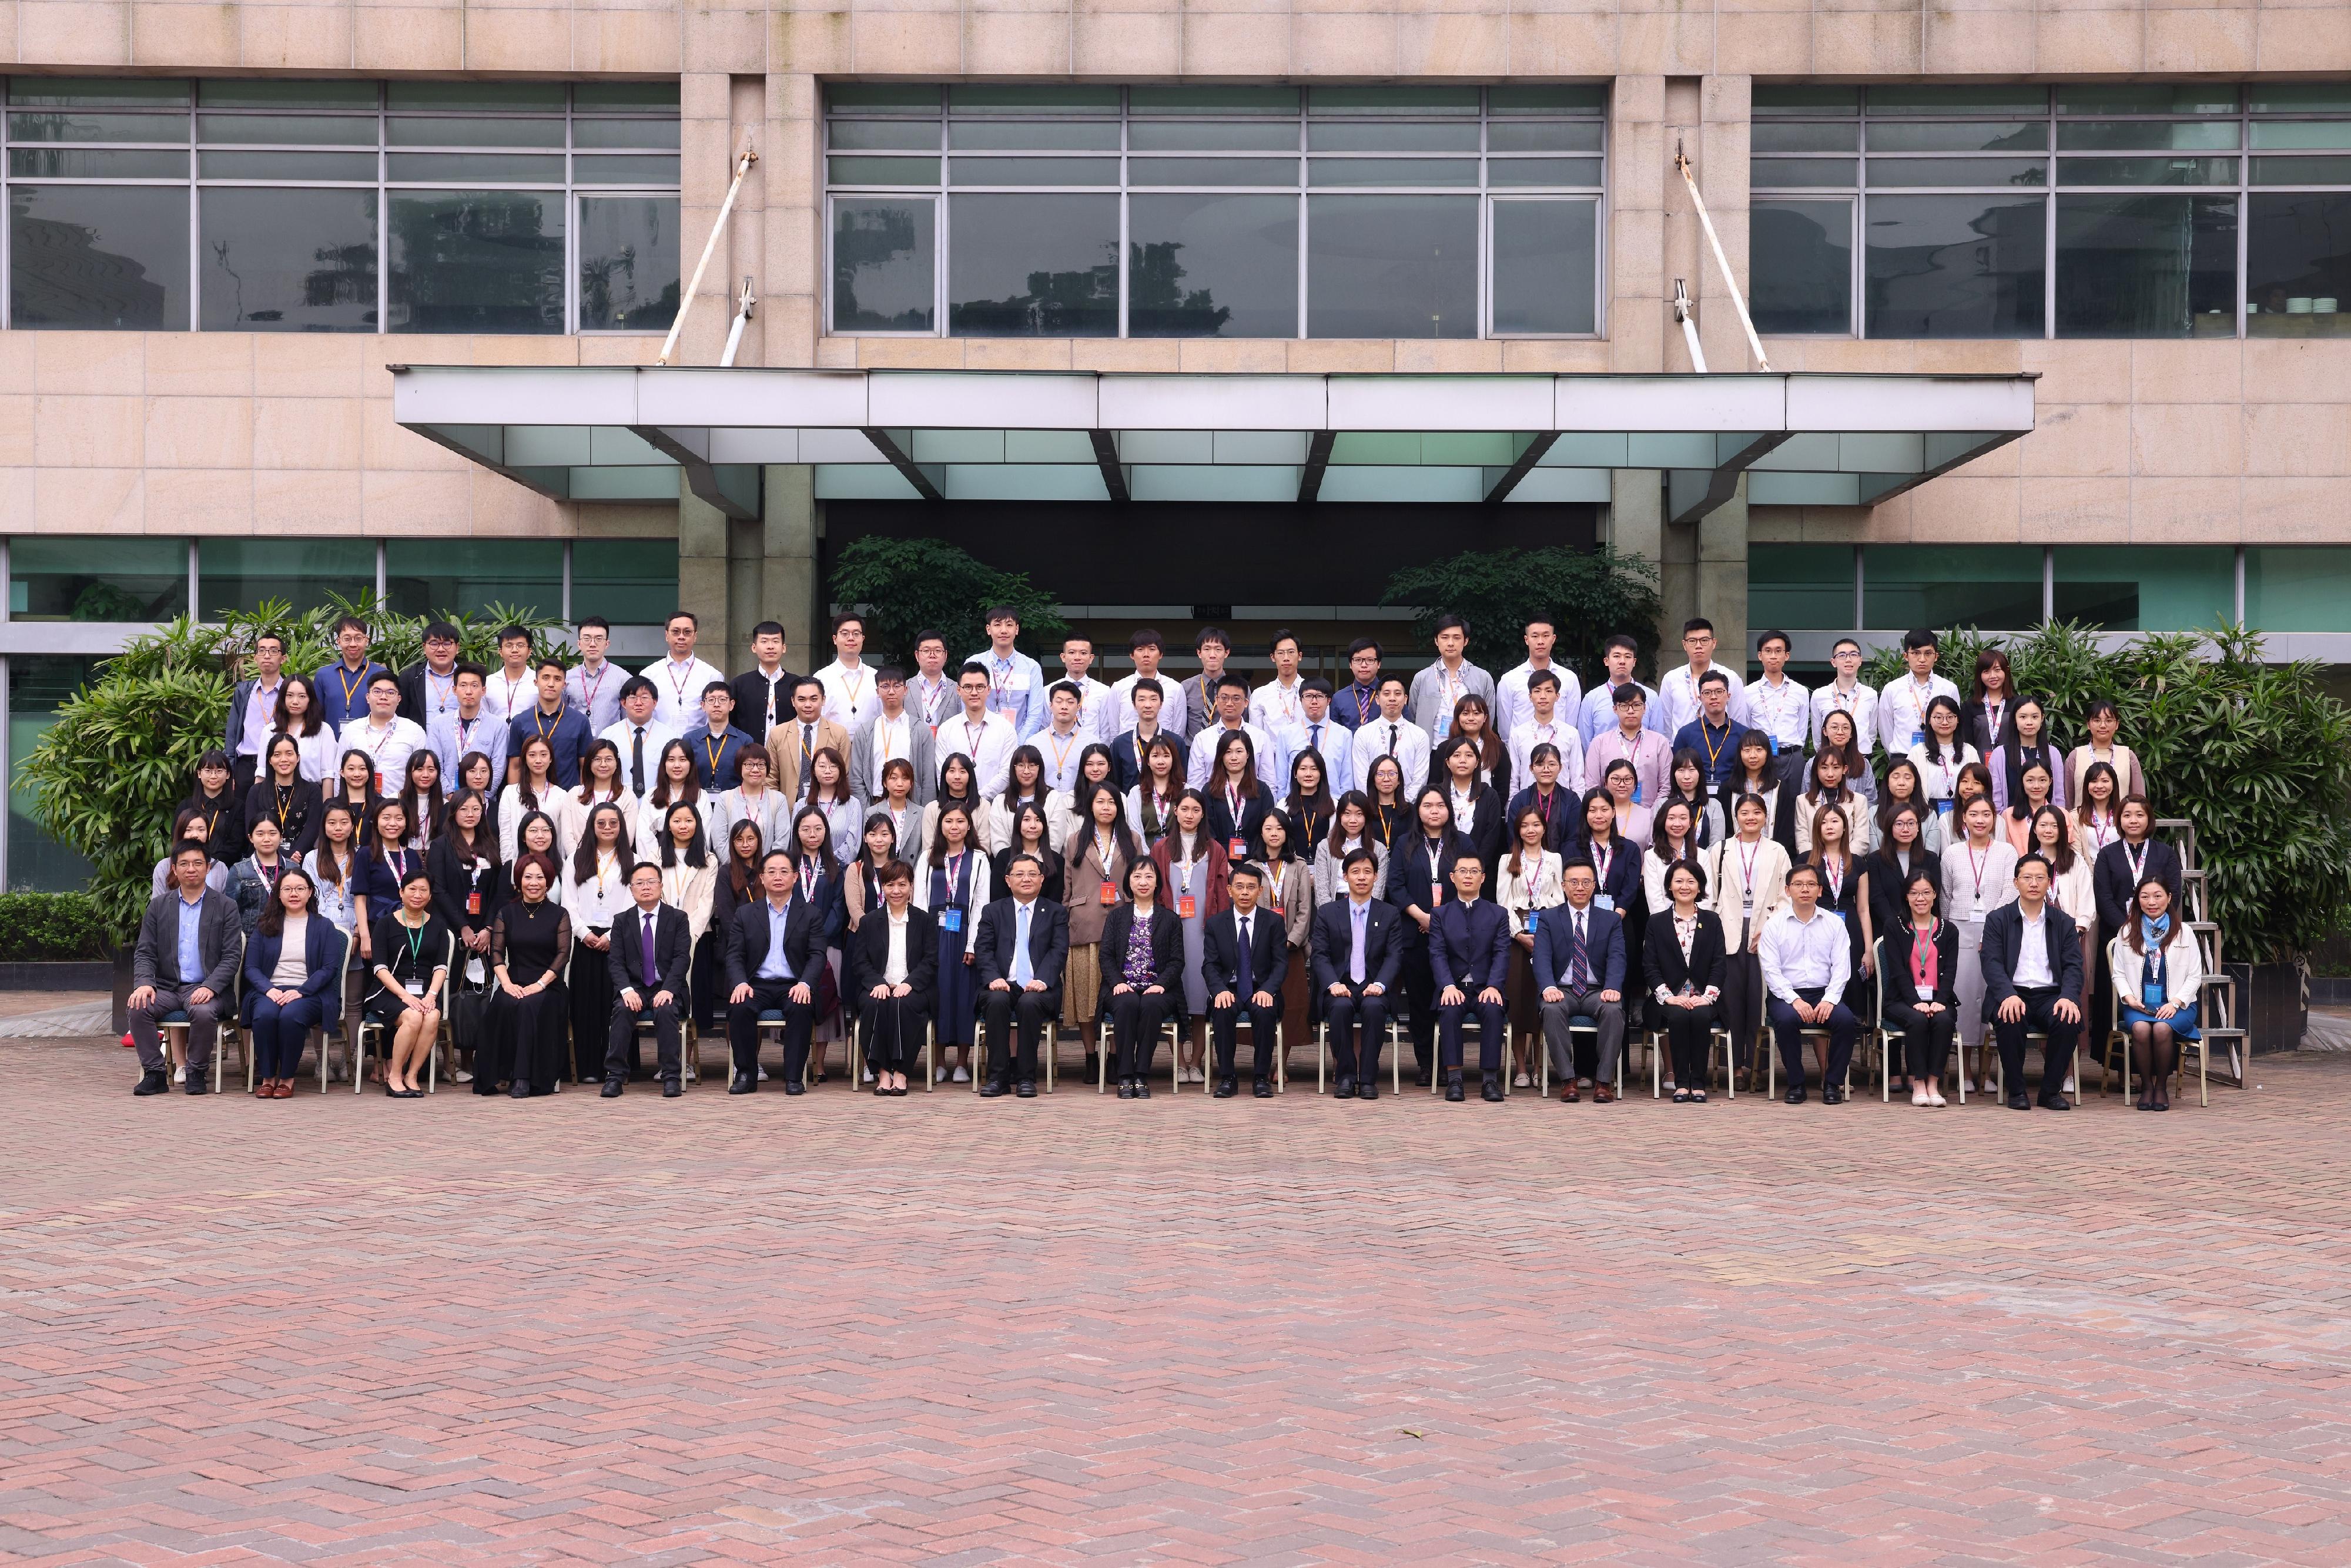 The Permanent Secretary for Education, Ms Michelle Li, today (April 11) led the first Mainland study tour for newly-joined teachers to visit South China Normal University (SCNU) in Guangzhou. Photo shows Ms Li (front row, tenth right); the First-level Inspector of the Department of Education of Guangdong Province, Mr Zhu Chaohua (front row, ninth right), and the President and Deputy Secretary of the Communist Party of China SCNU Committee, Mr Wang Enke (front row, eighth left), with teacher participants of the study tour.